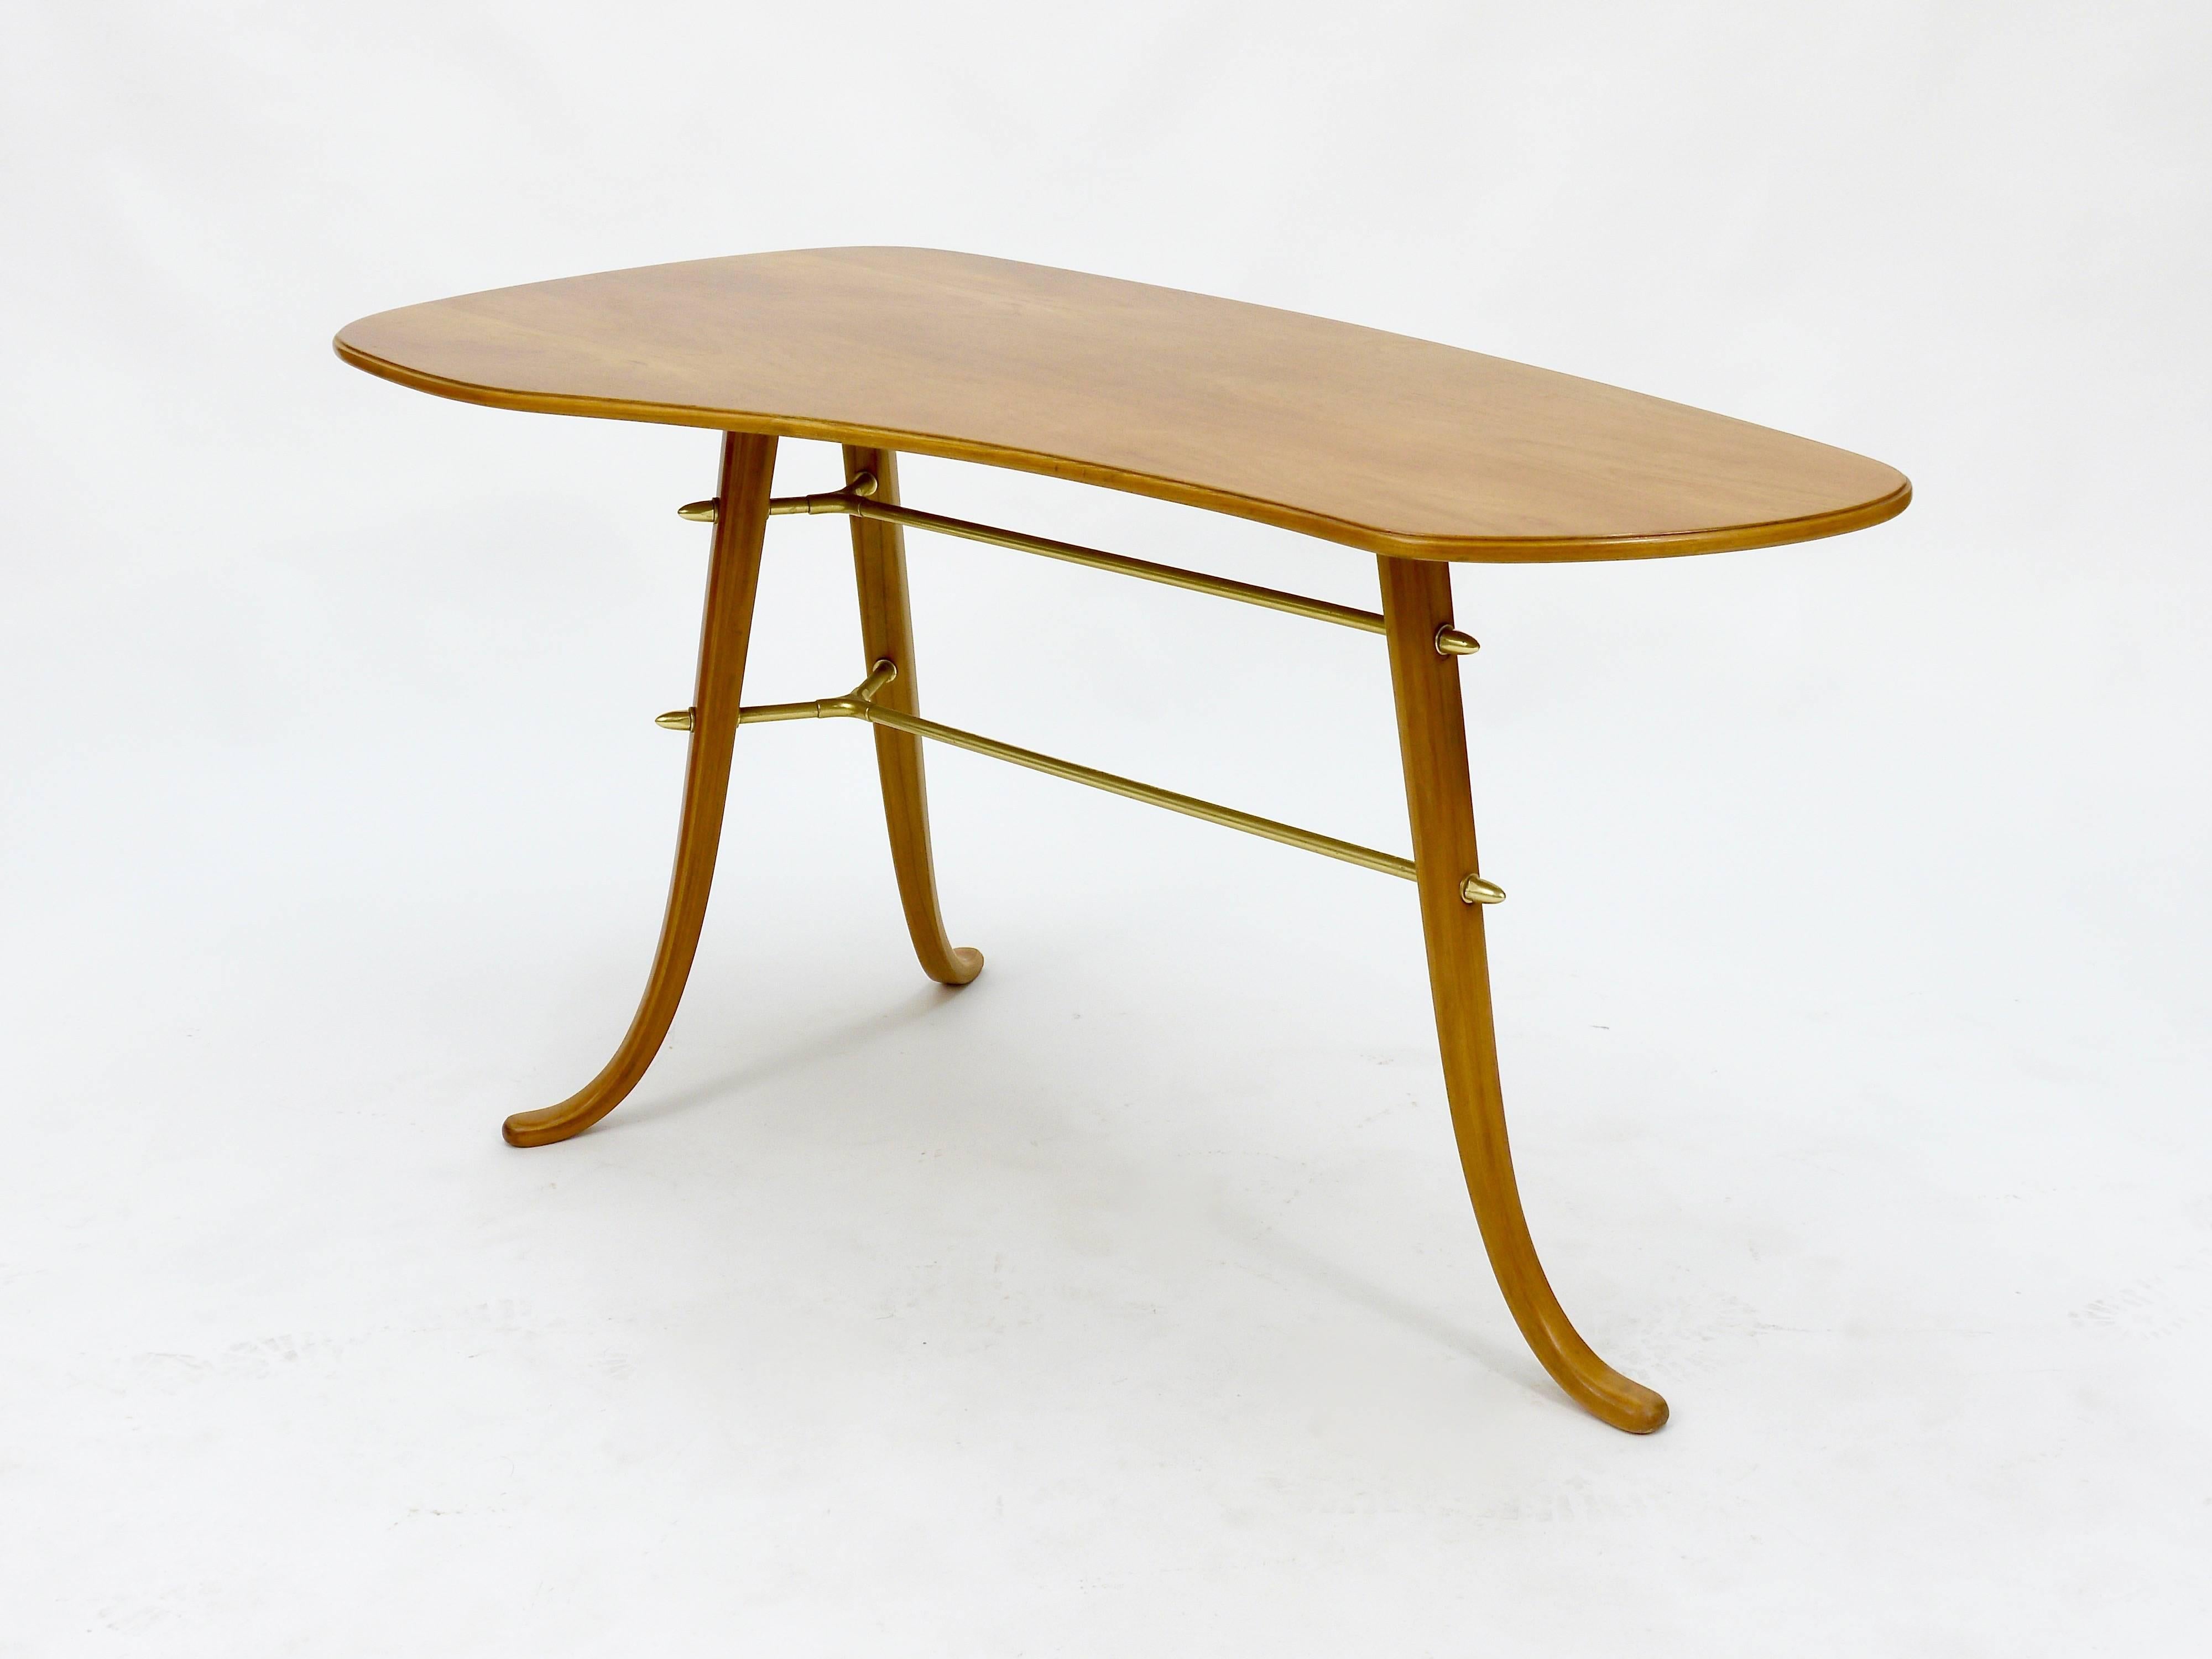 20th Century Swedish Modernist Coffee Table, Attributed to Josef Frank, 1950s